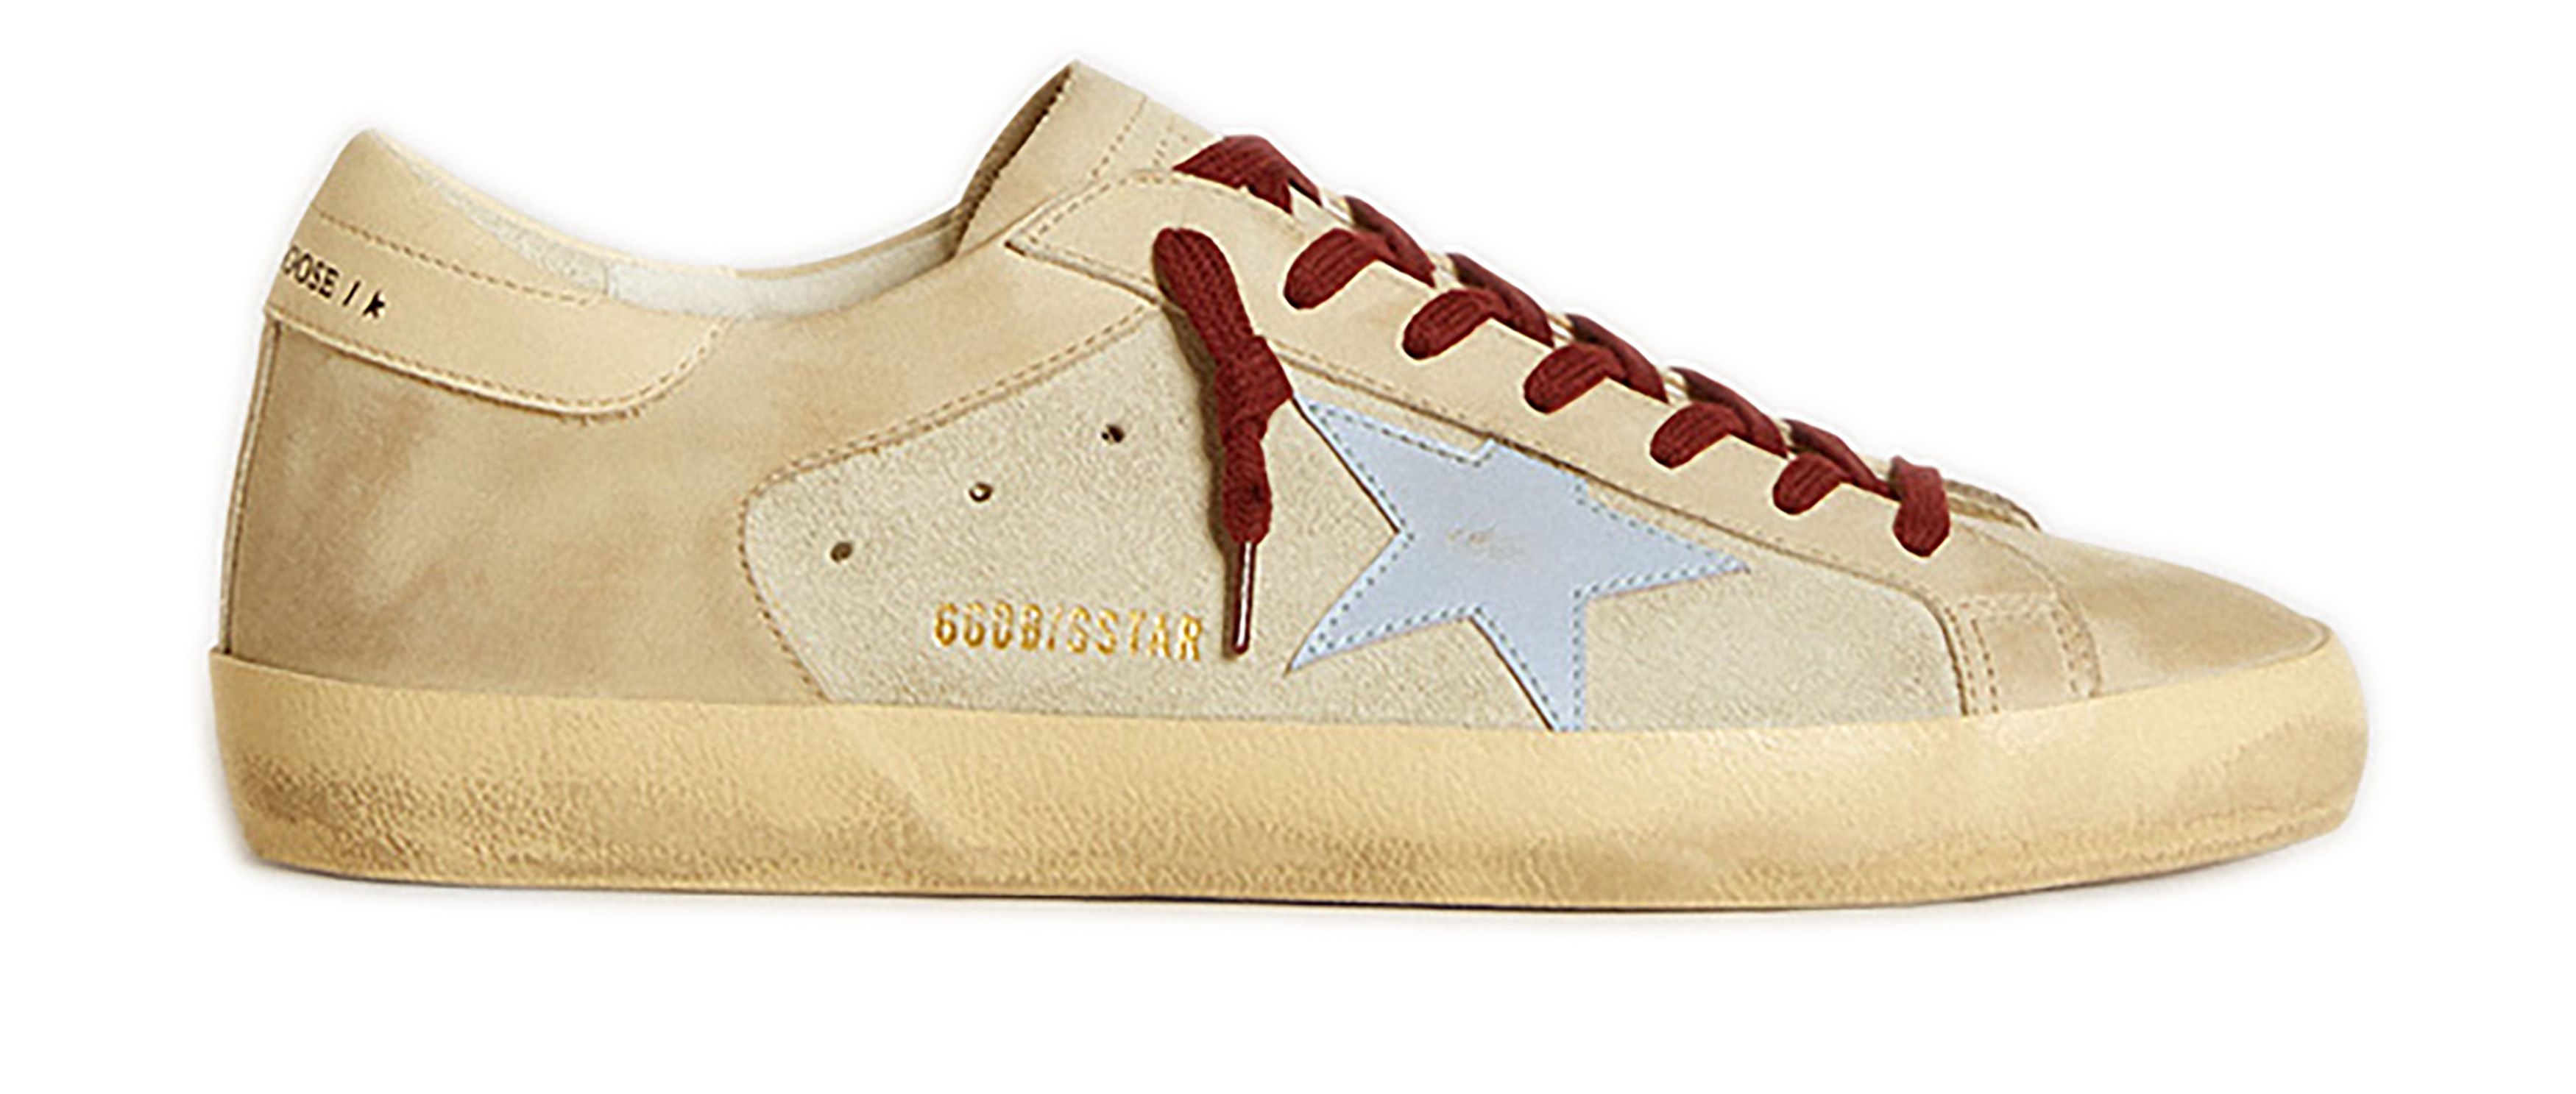 Golden Goose Super-Star sneakers with double quarters